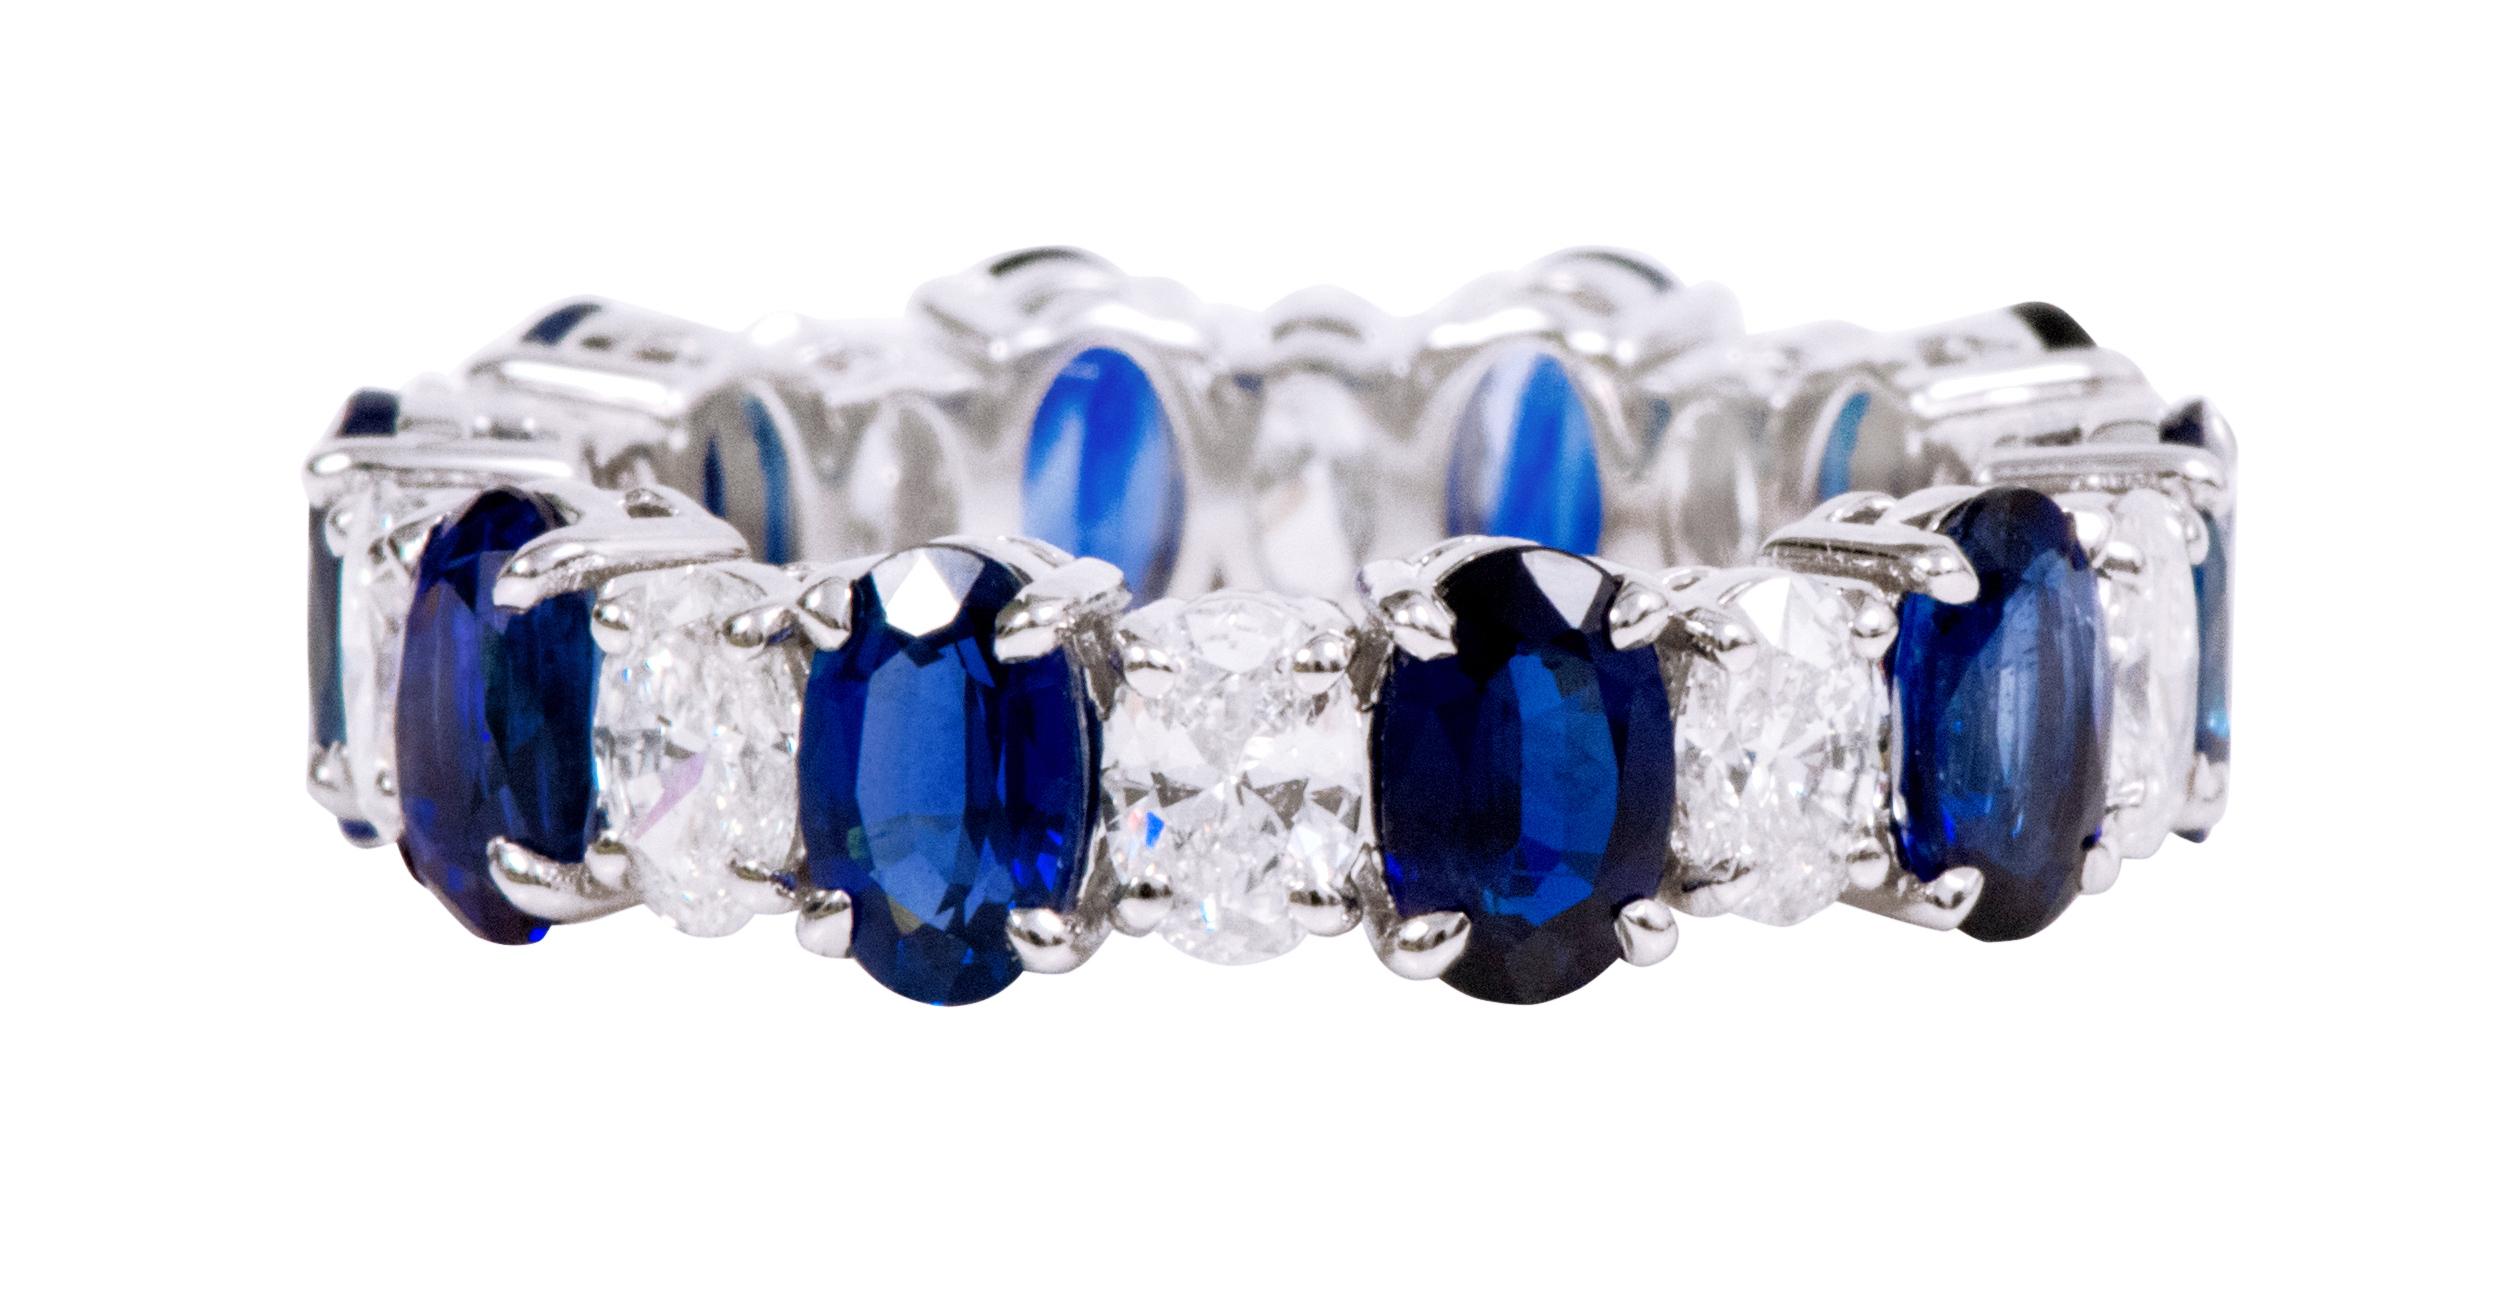 18 Karat White Gold 5.46 Carat Solitaire Sapphire and Diamond Eternity Band Ring

Love is an eternal feeling that fills our heart with joy and enchanting renditions. It is a symphony of bliss and to shower love on your partner, we present this